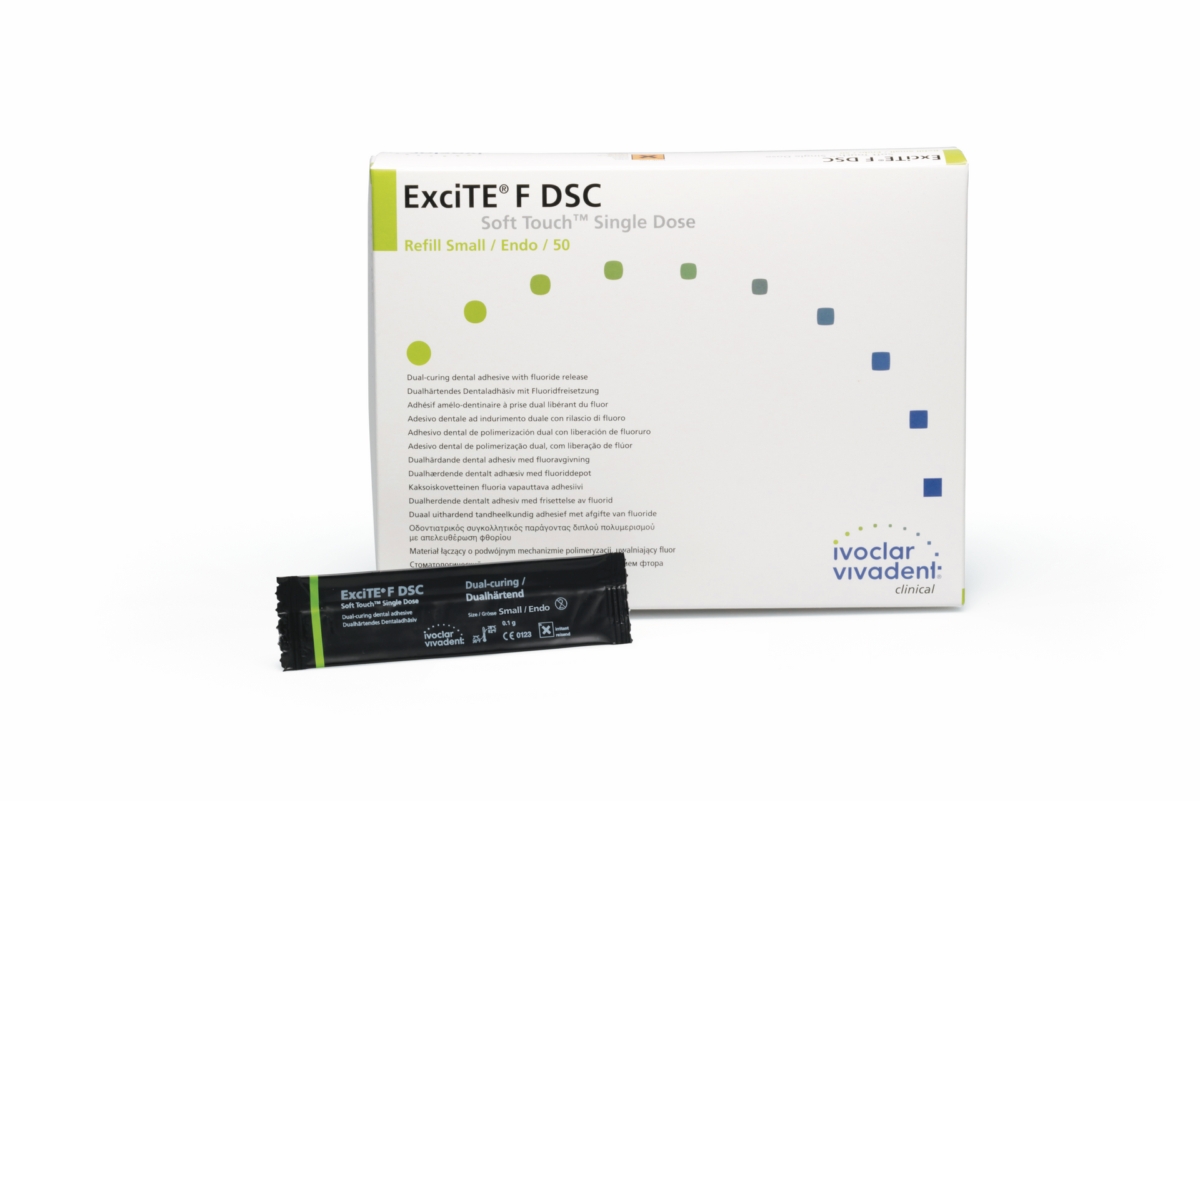 EXCITE F DSC JER/DOSIS SMALL 50x0,1GR